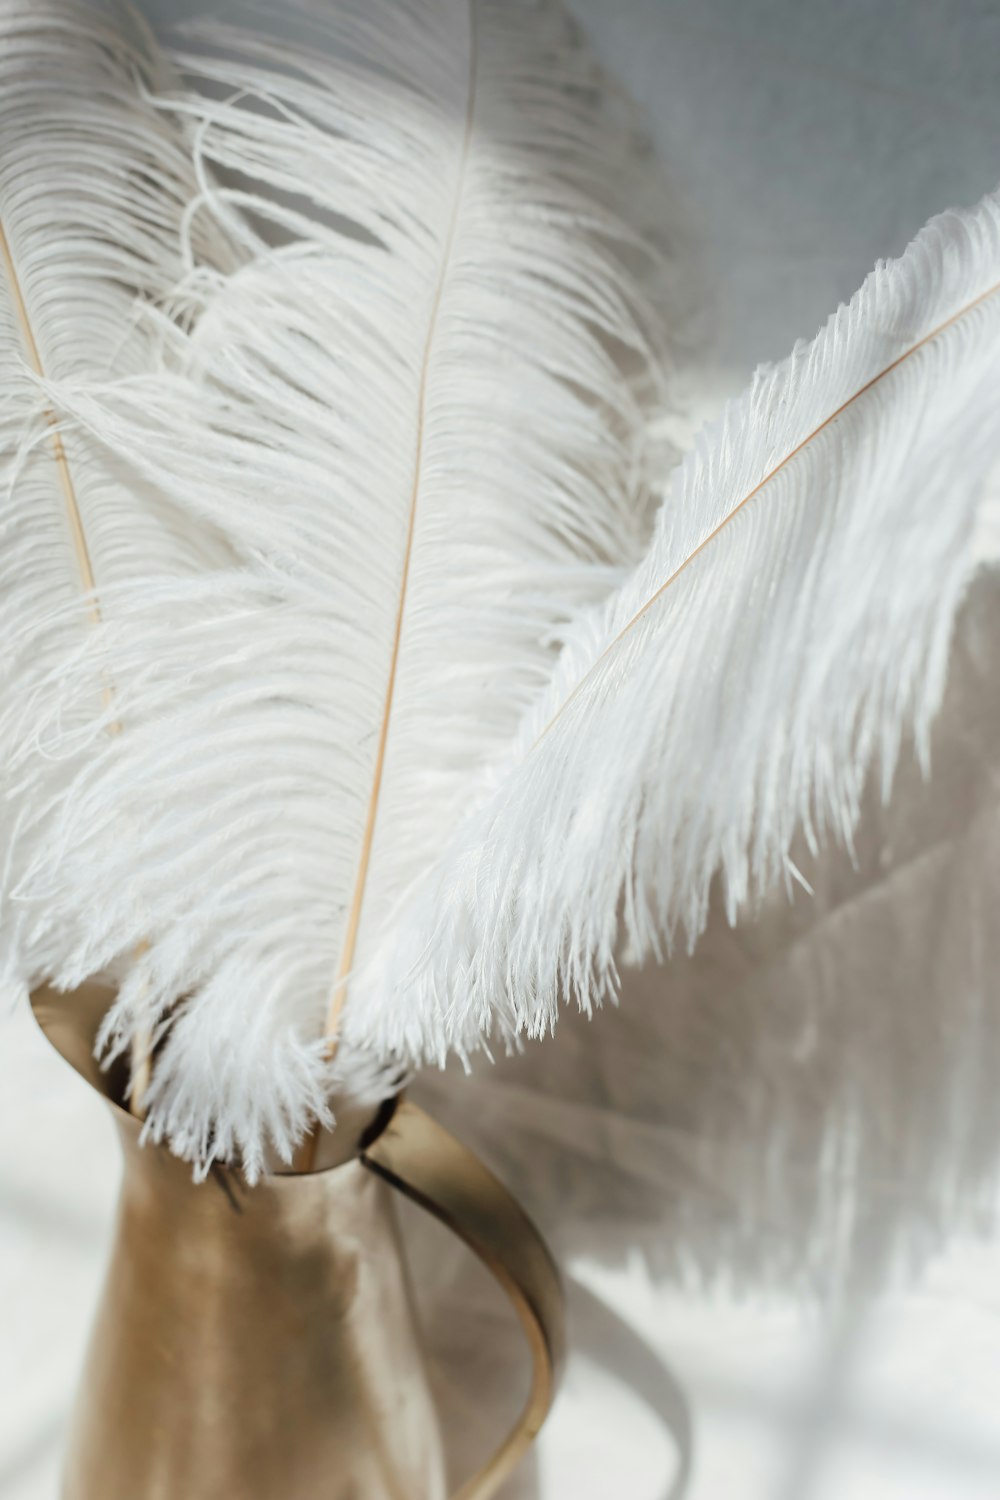 white feather on brown wooden table